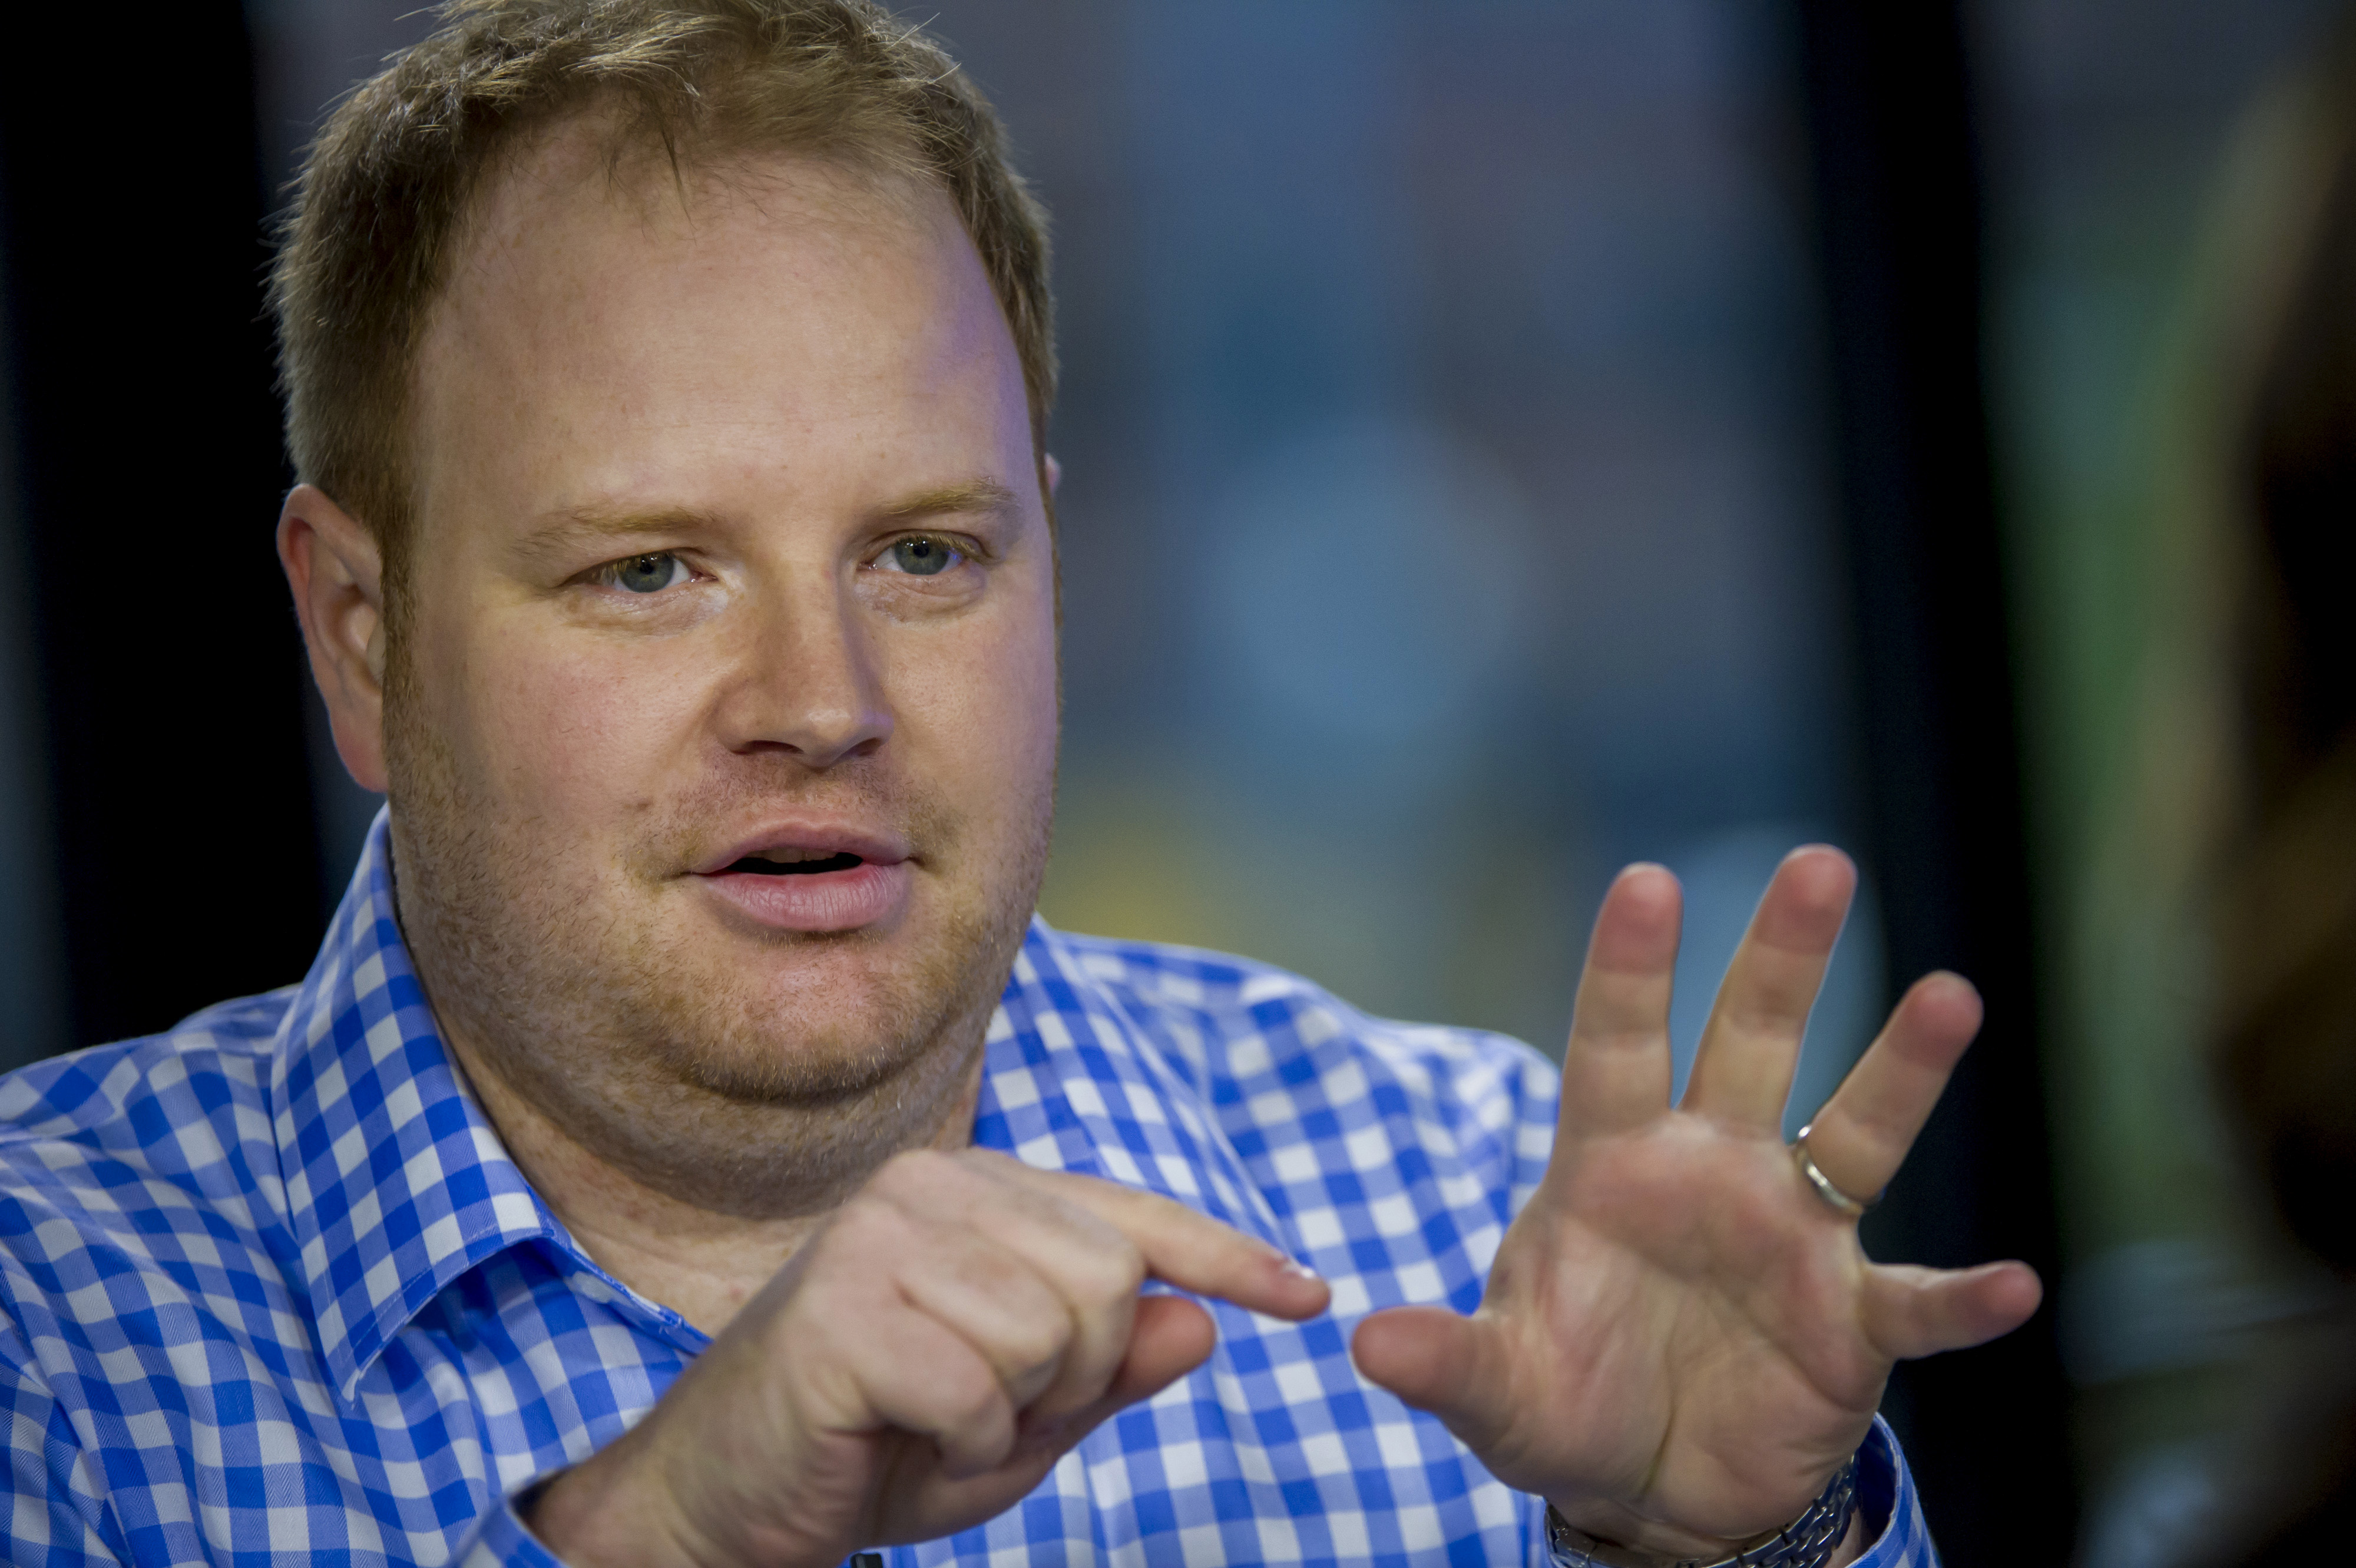 Parker Conrad, co-founder and chief executive officer of Zenefits, speaks during a Bloomberg West television interview in San Francisco, California, U.S., on Wednesday, Dec. 10, 2014. (David Paul Morris—Bloomberg/Getty Images)